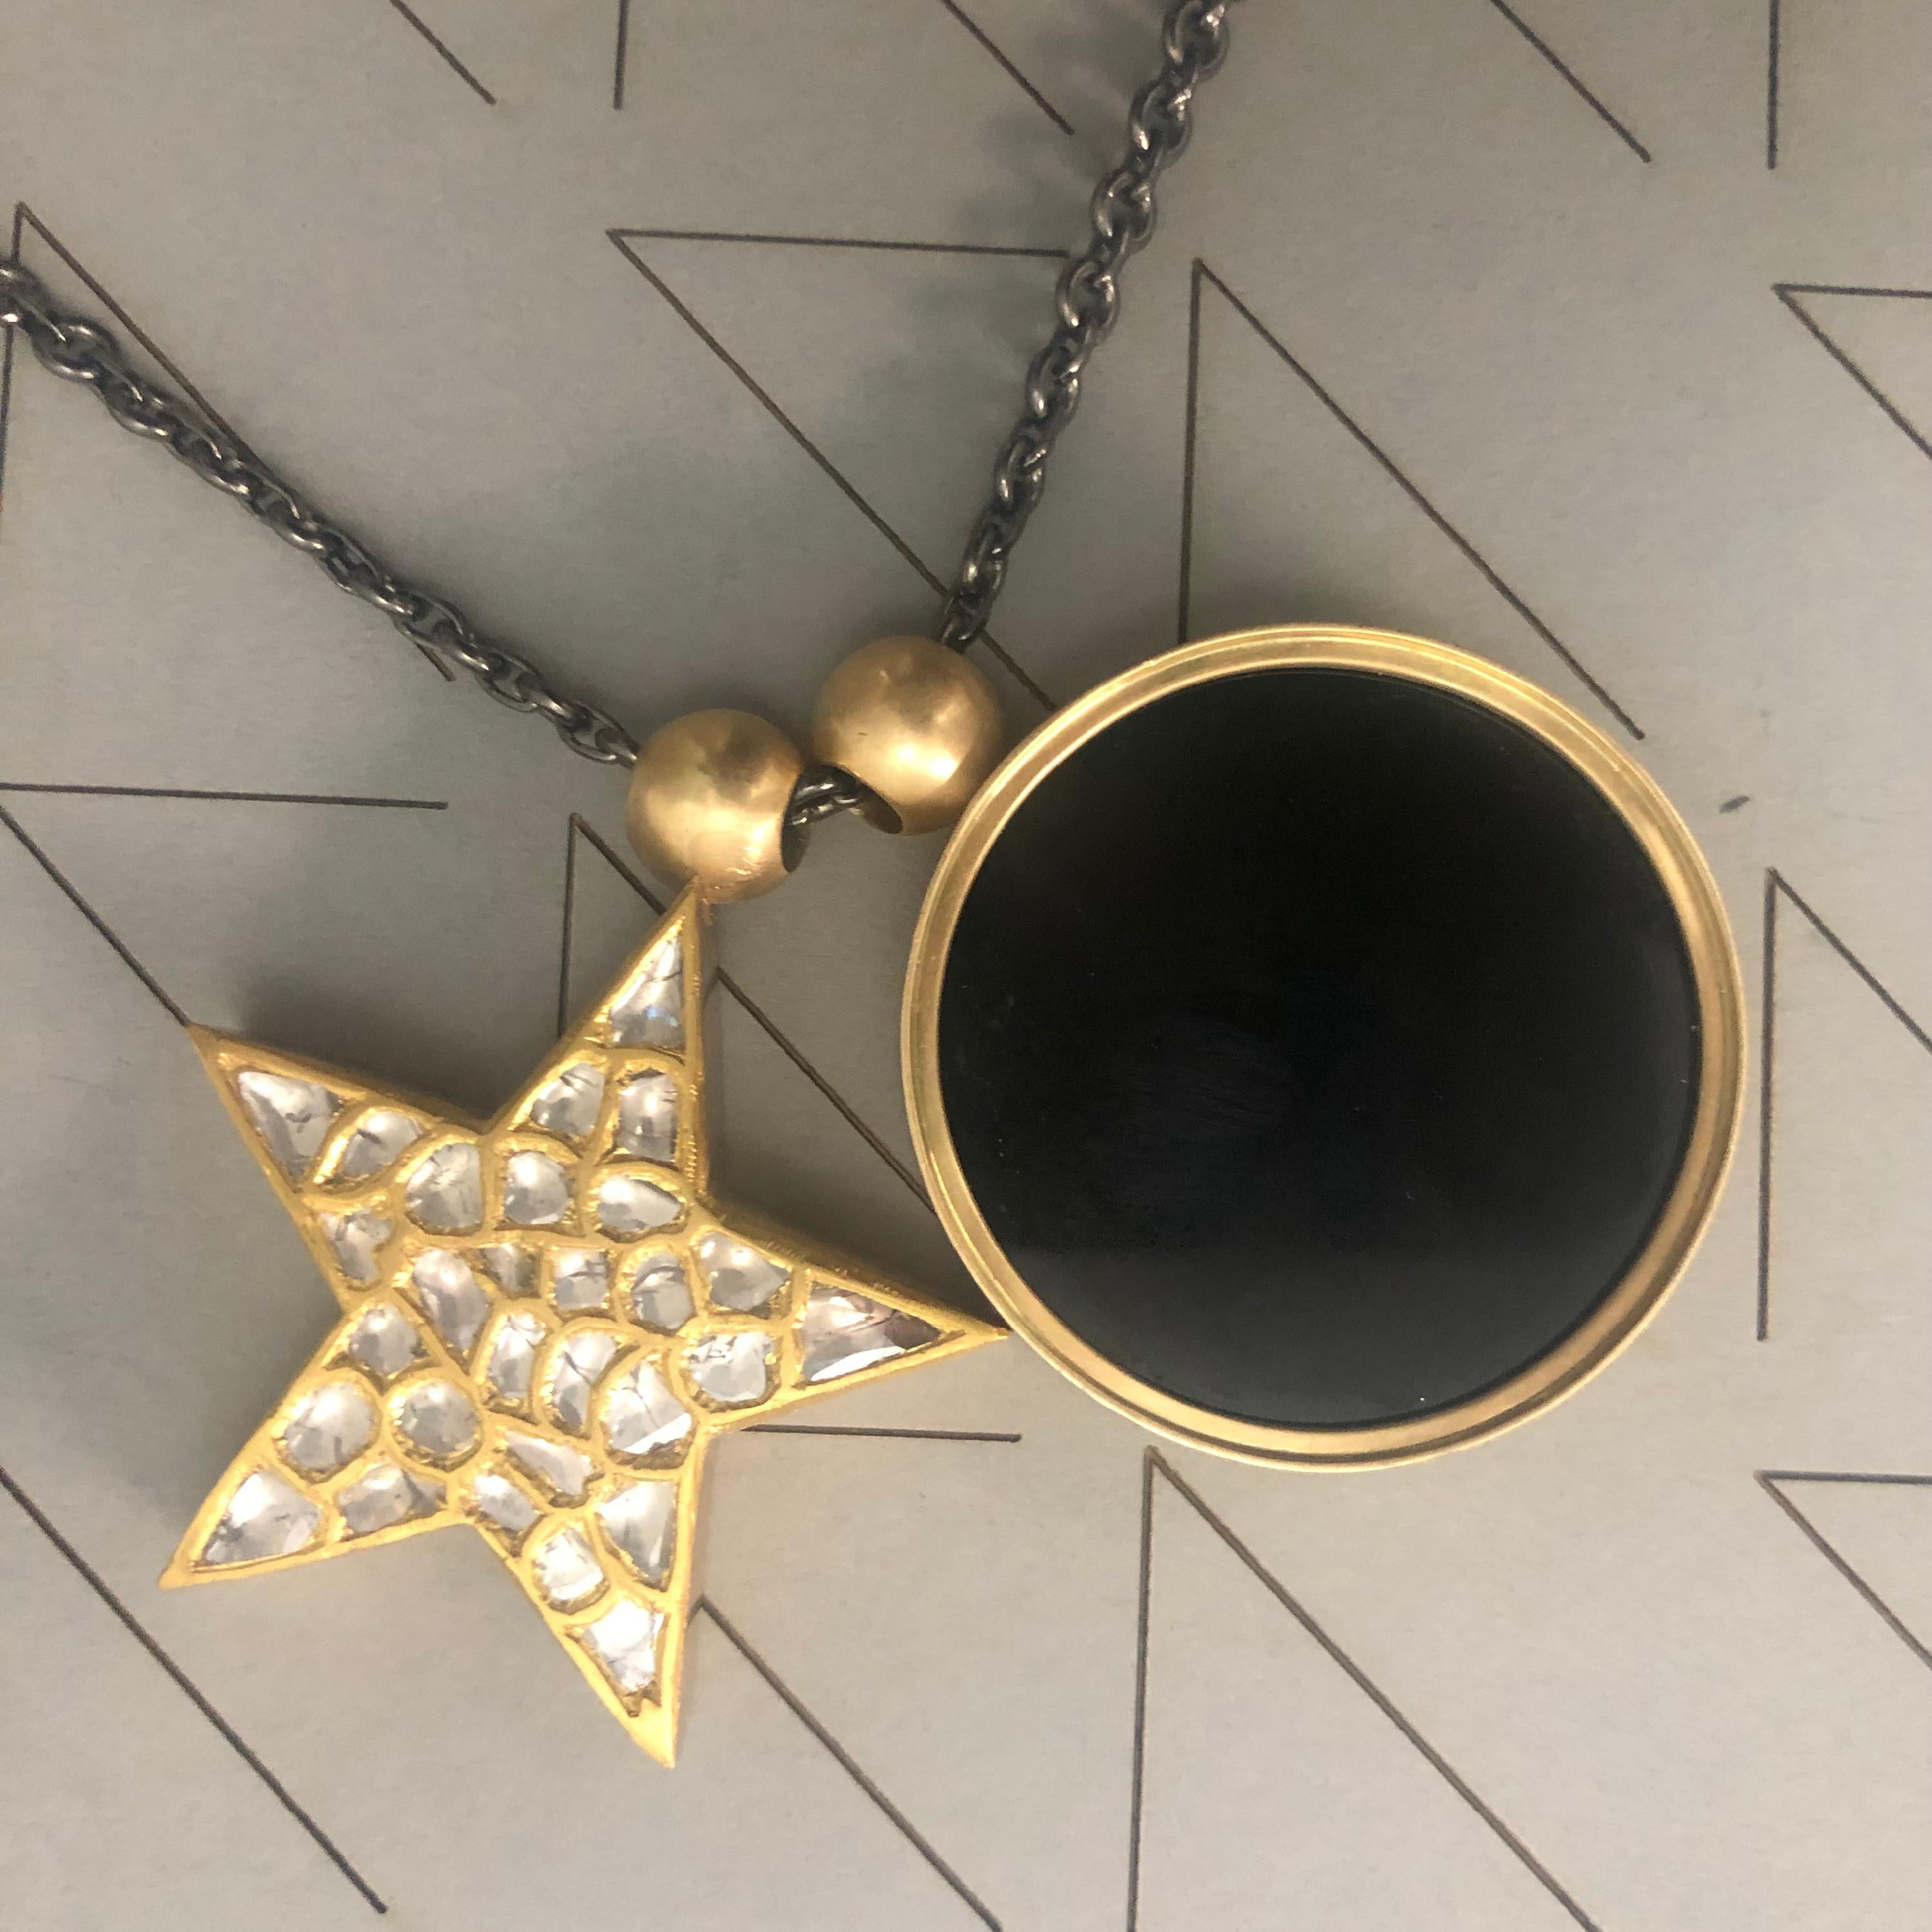 OUROBOROS Diamond and Onyx Pendant with 18 Karat Gold Chain necklace For Sale 3